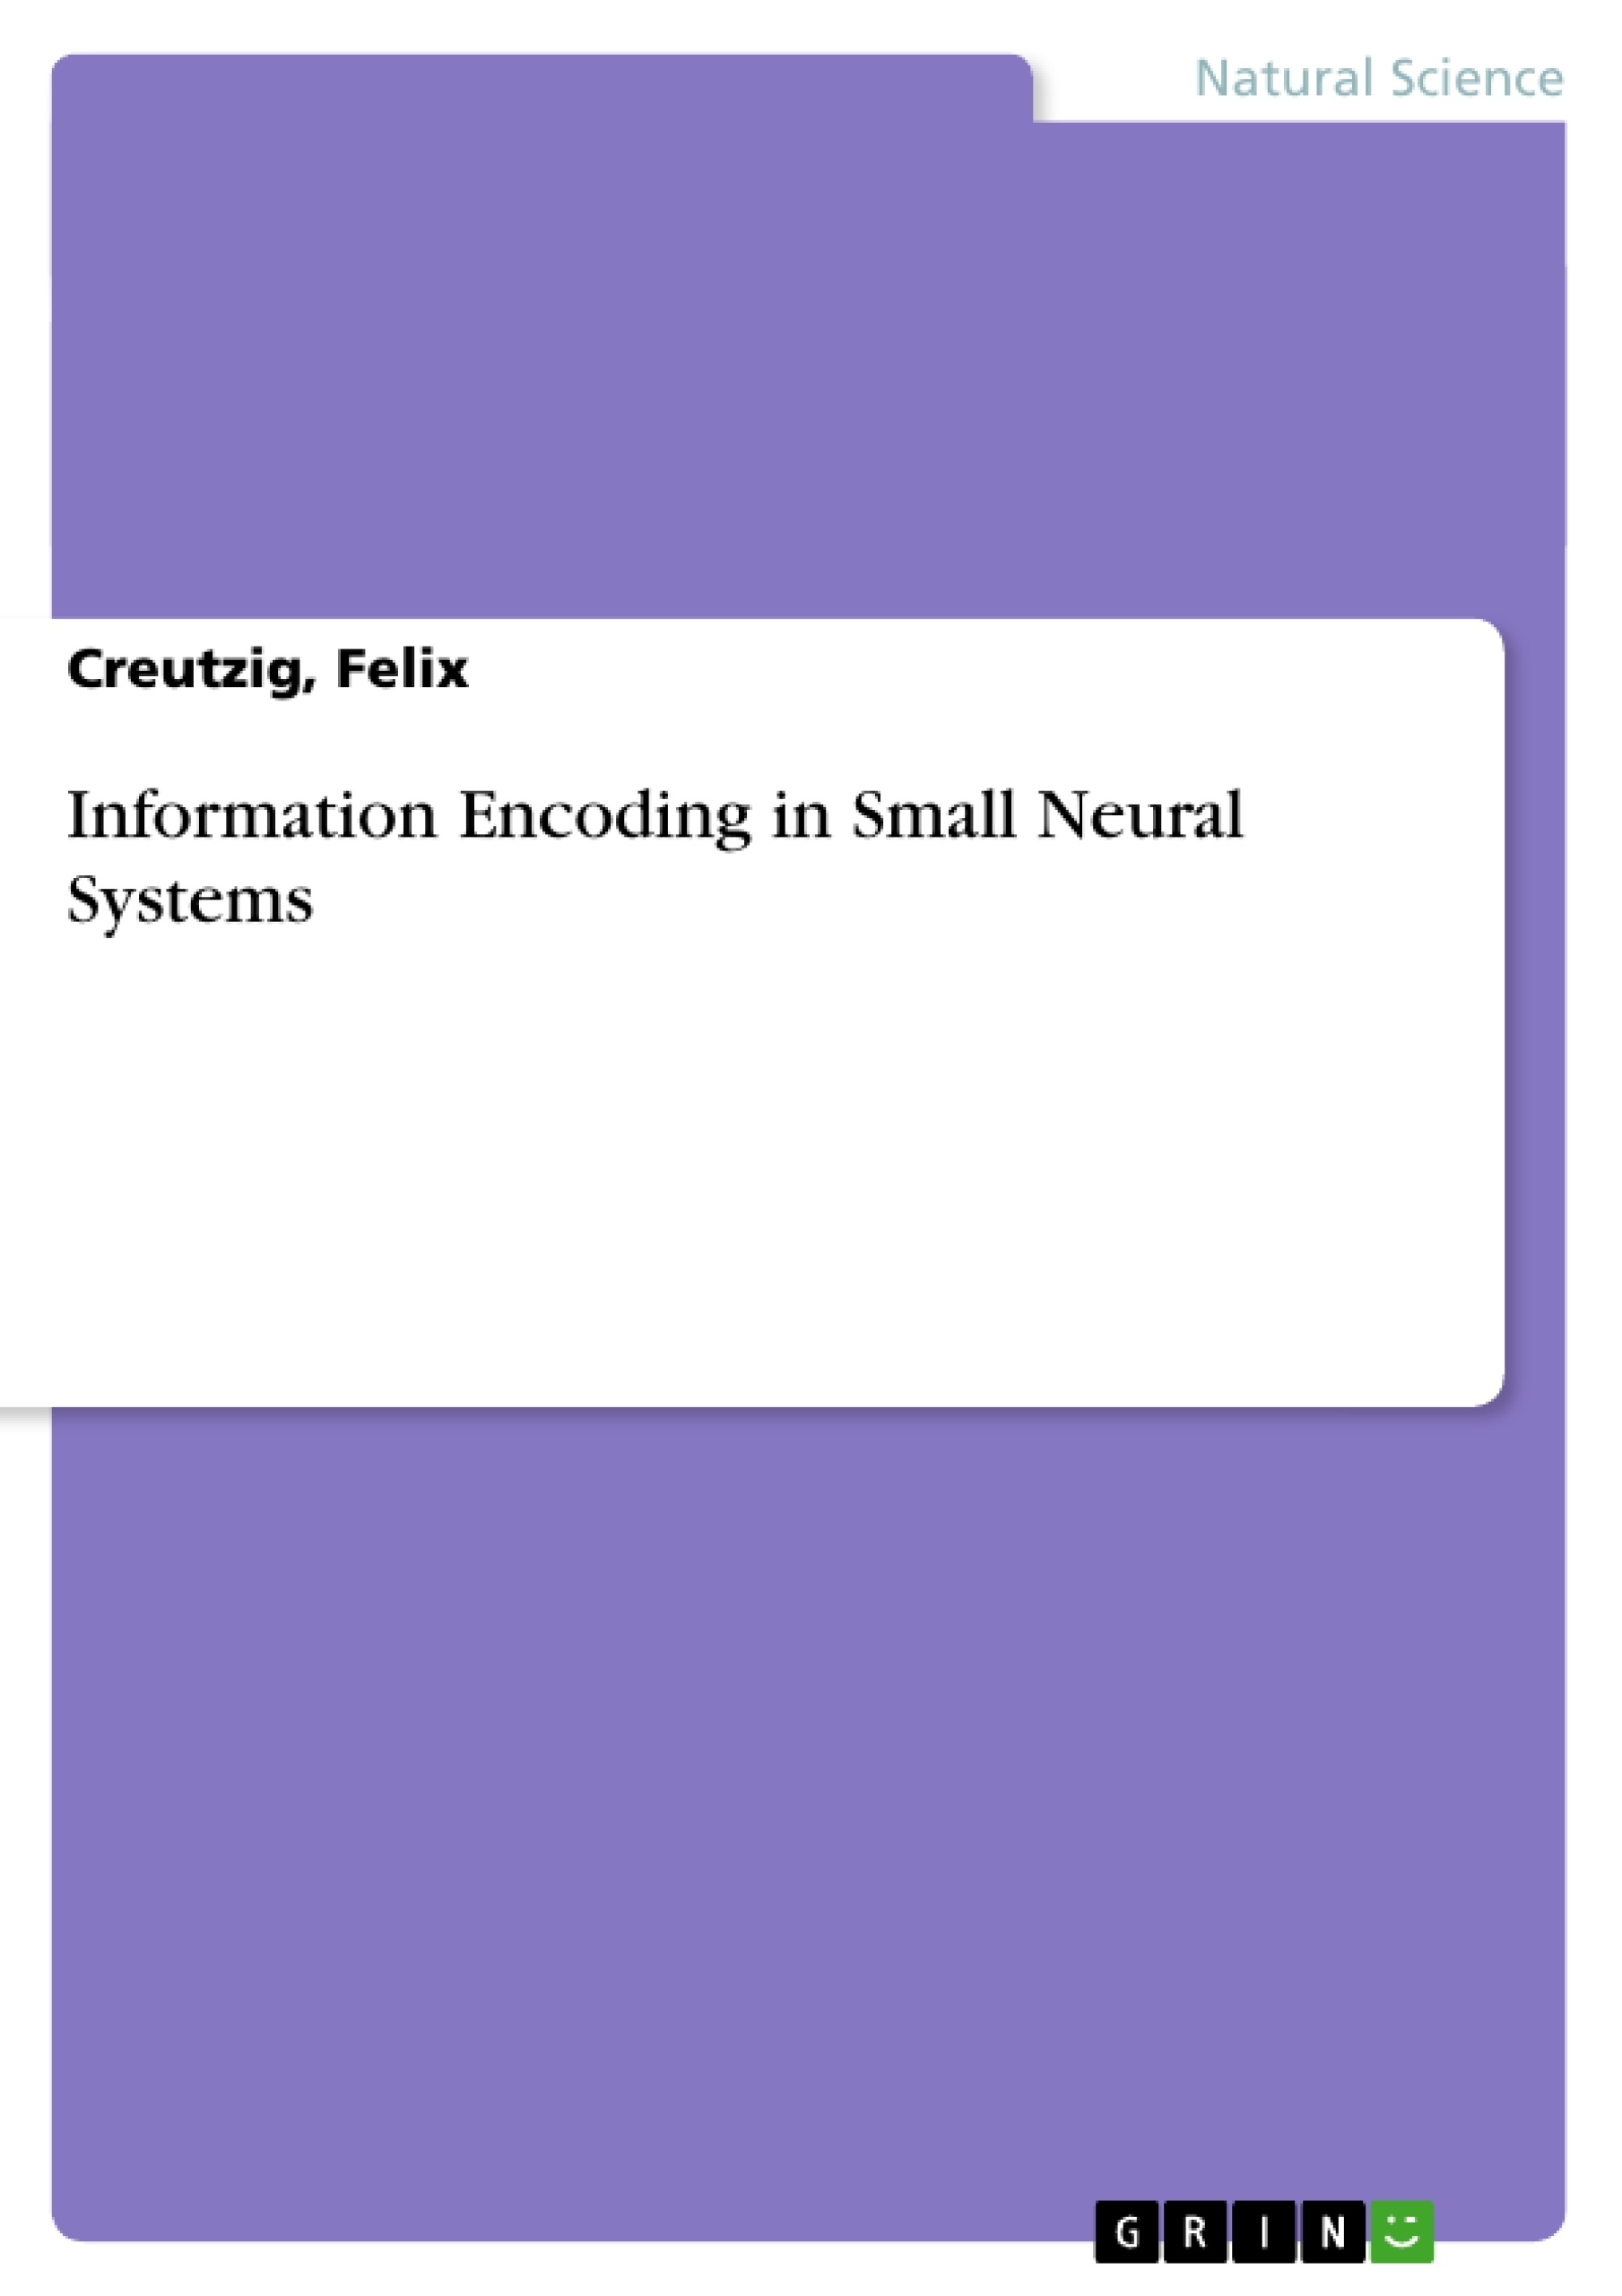 Title: Information Encoding in Small Neural Systems